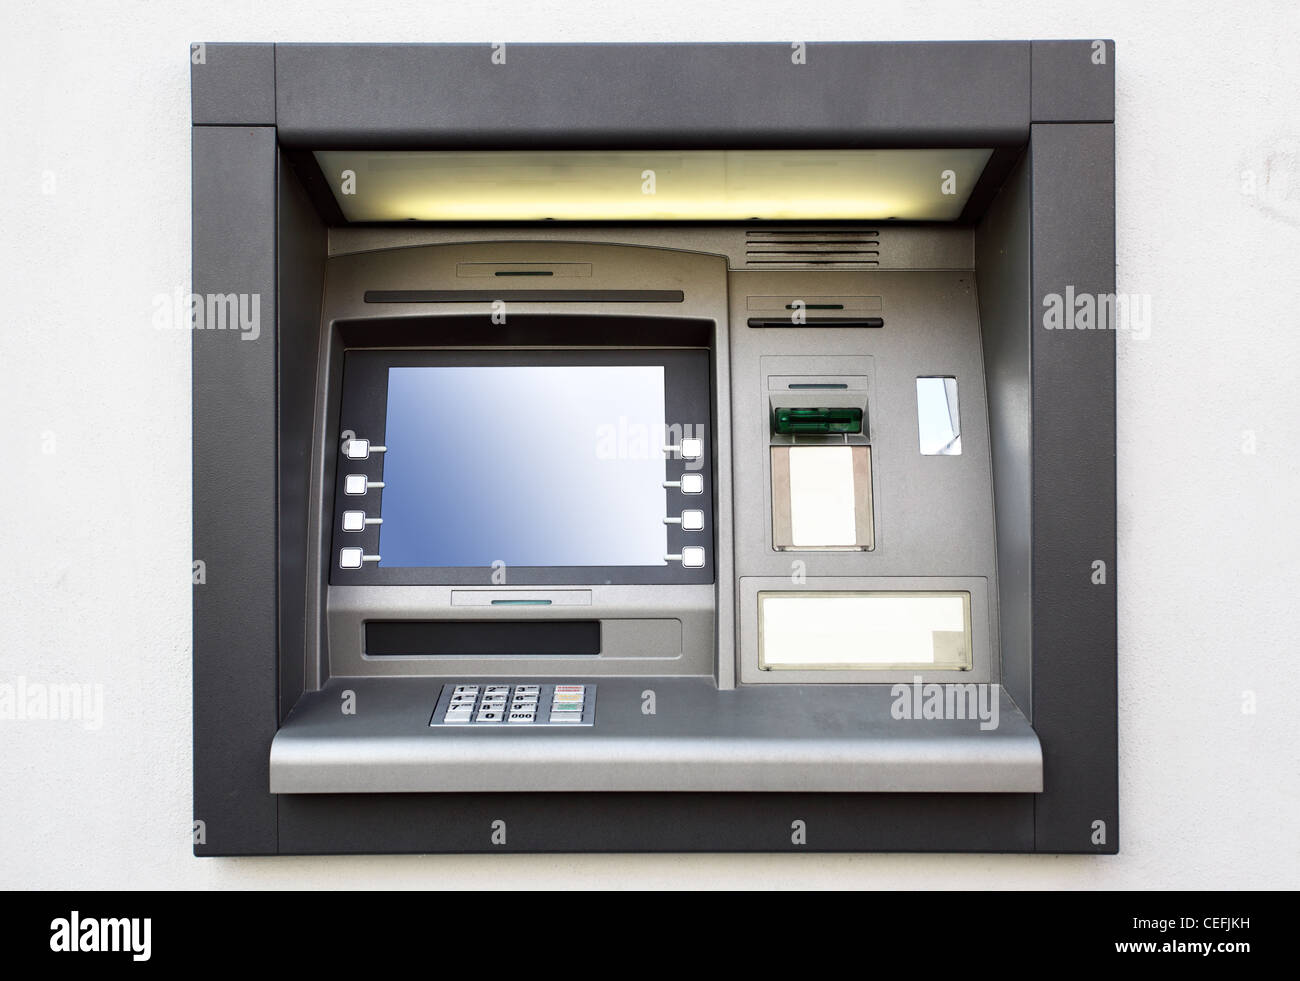 Automated teller machine close up on a wall Stock Photo